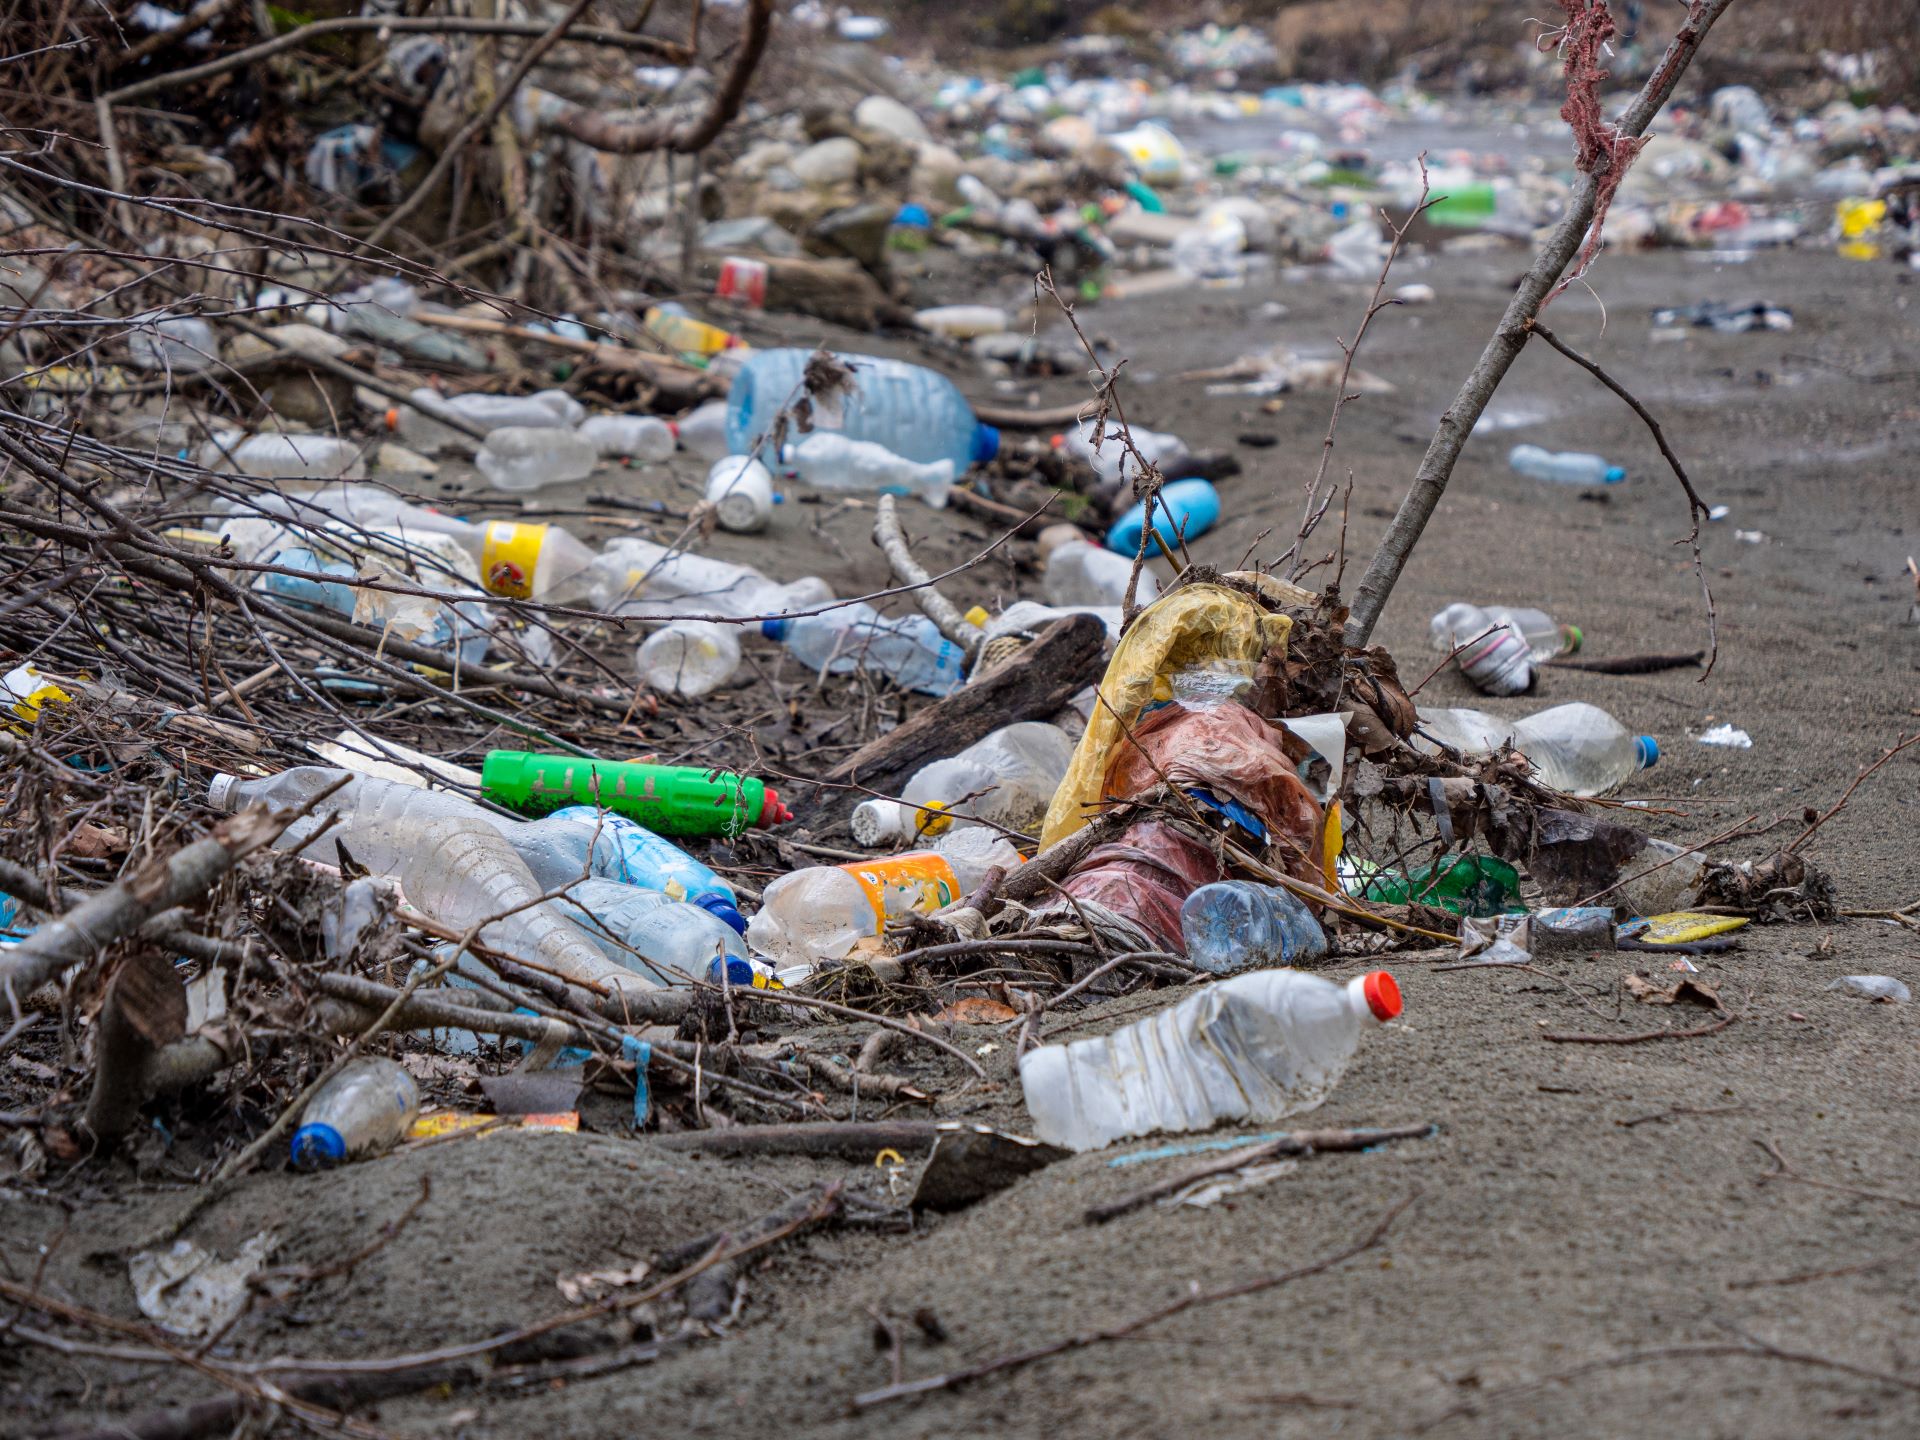 New study reveals deeply upsetting truth about plastic trash: 'The findings are disturbing'